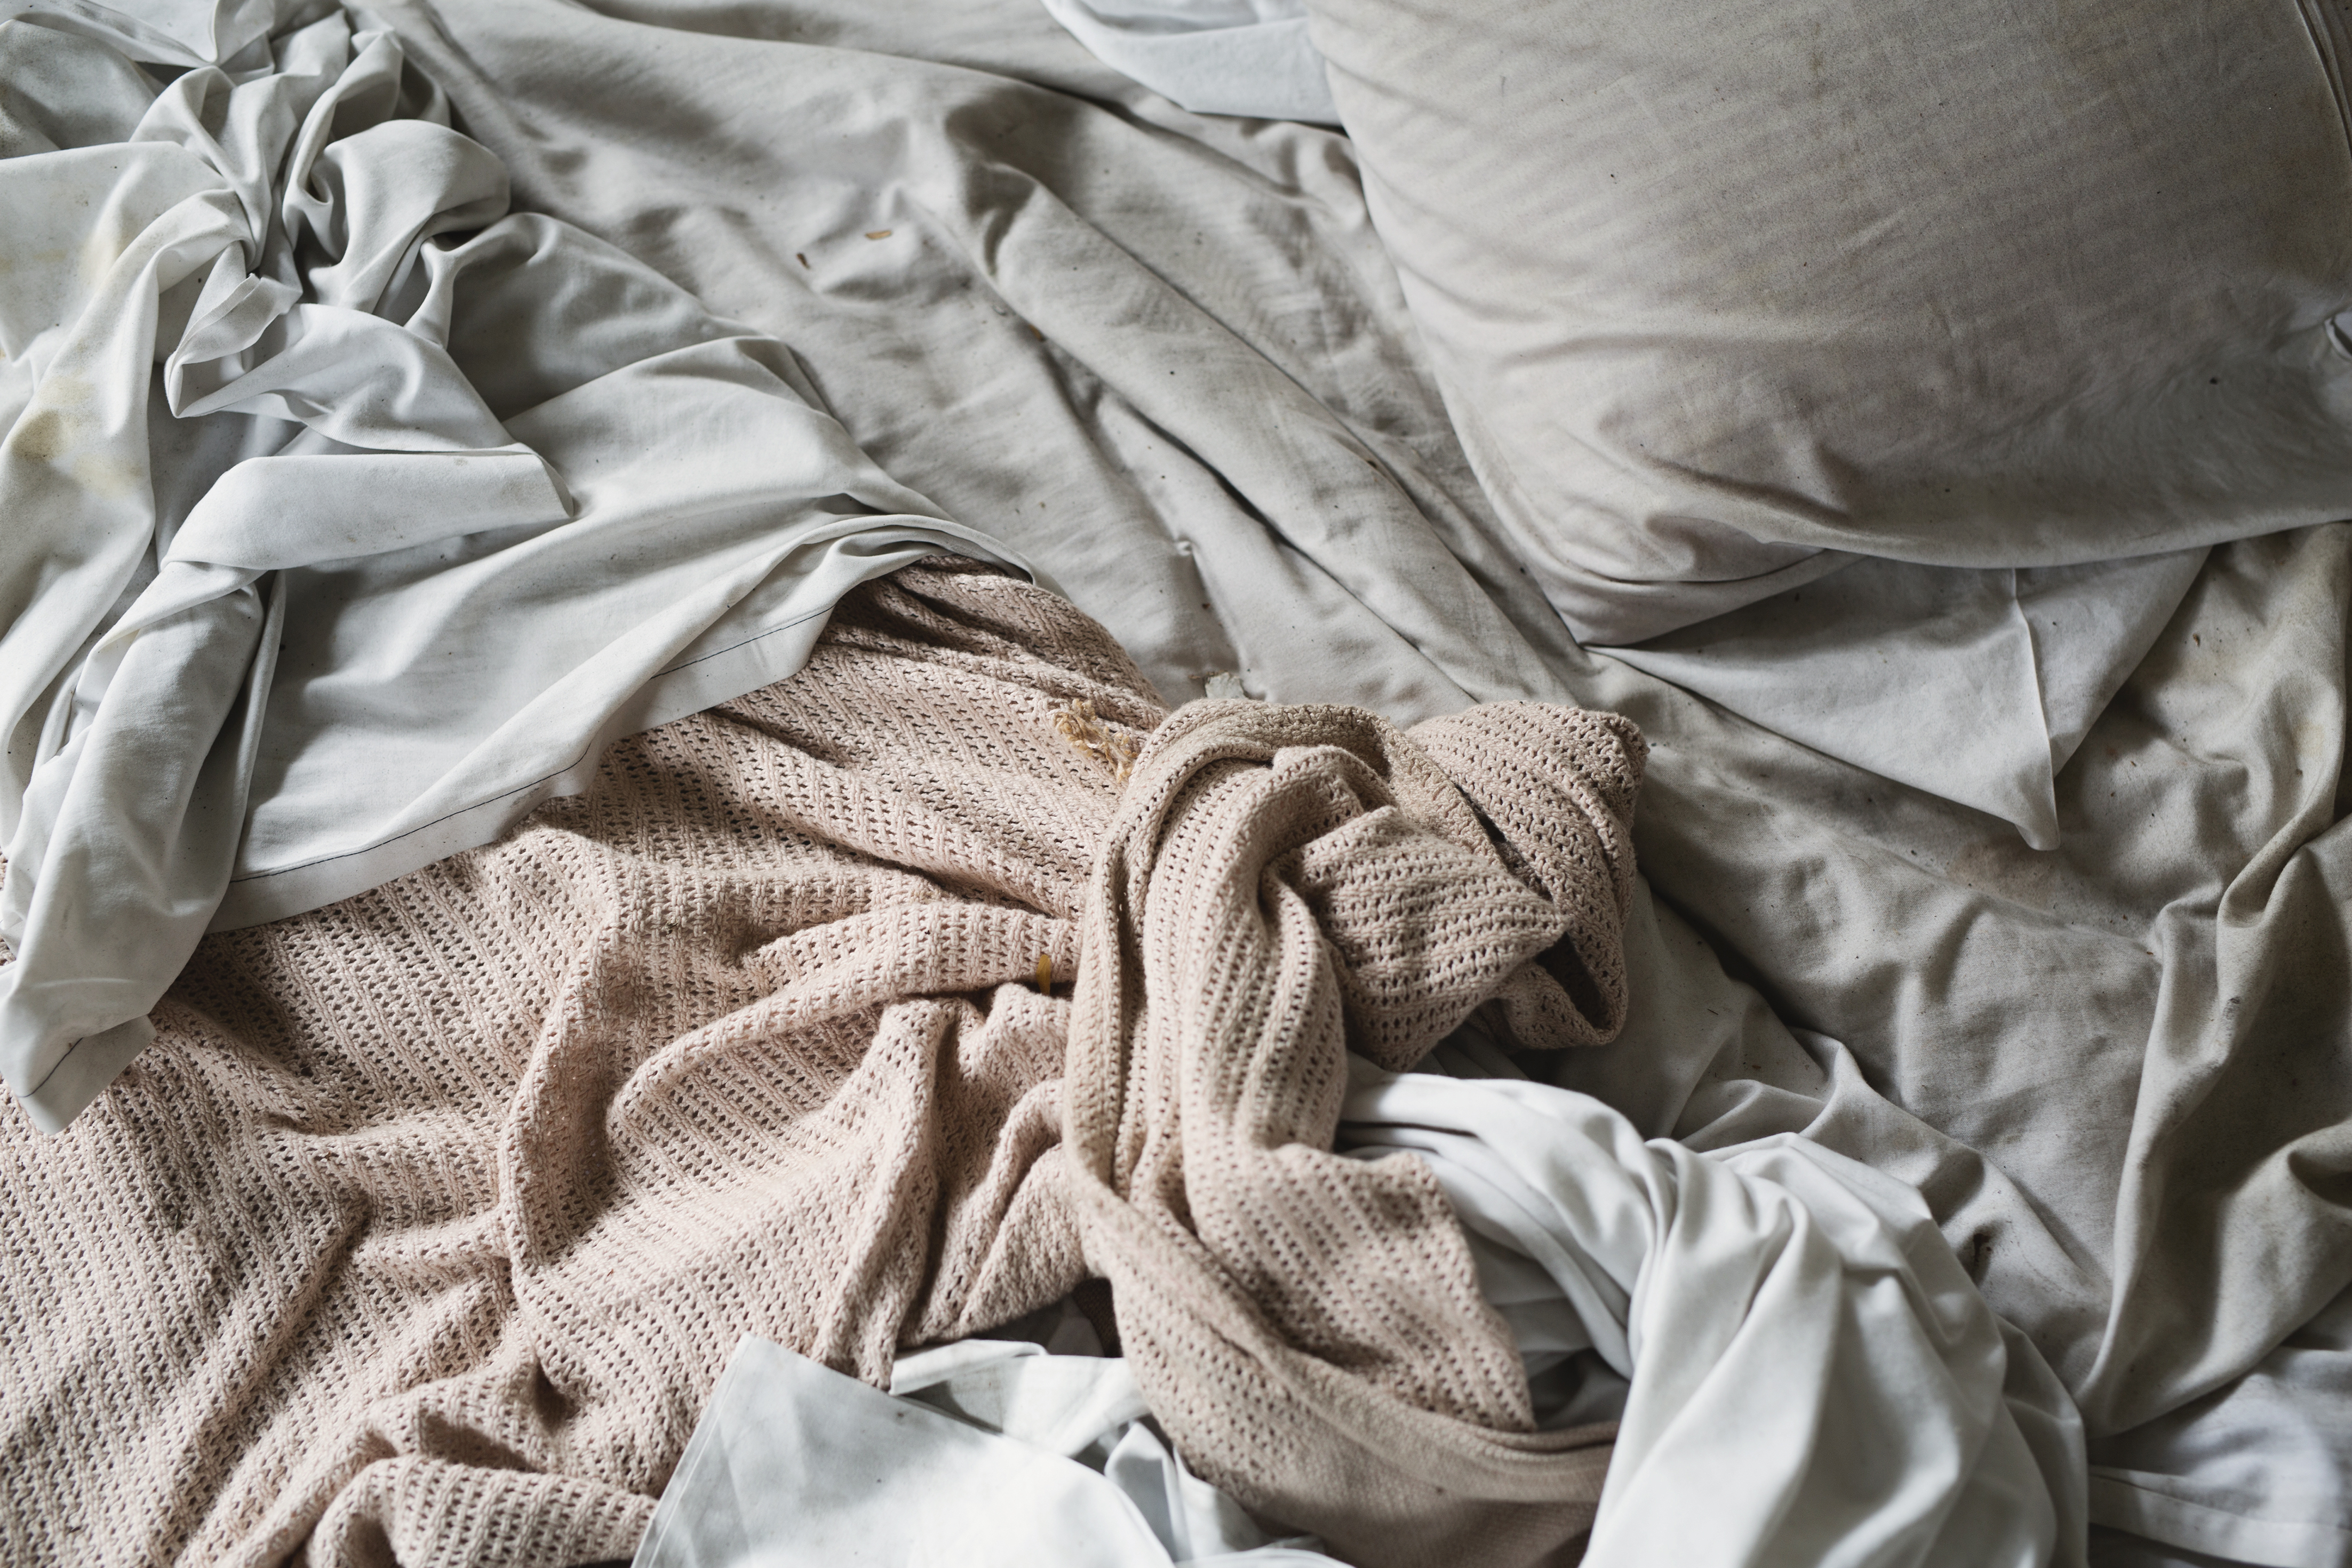 Abstract Unmade Bed | Source: Shutterstock